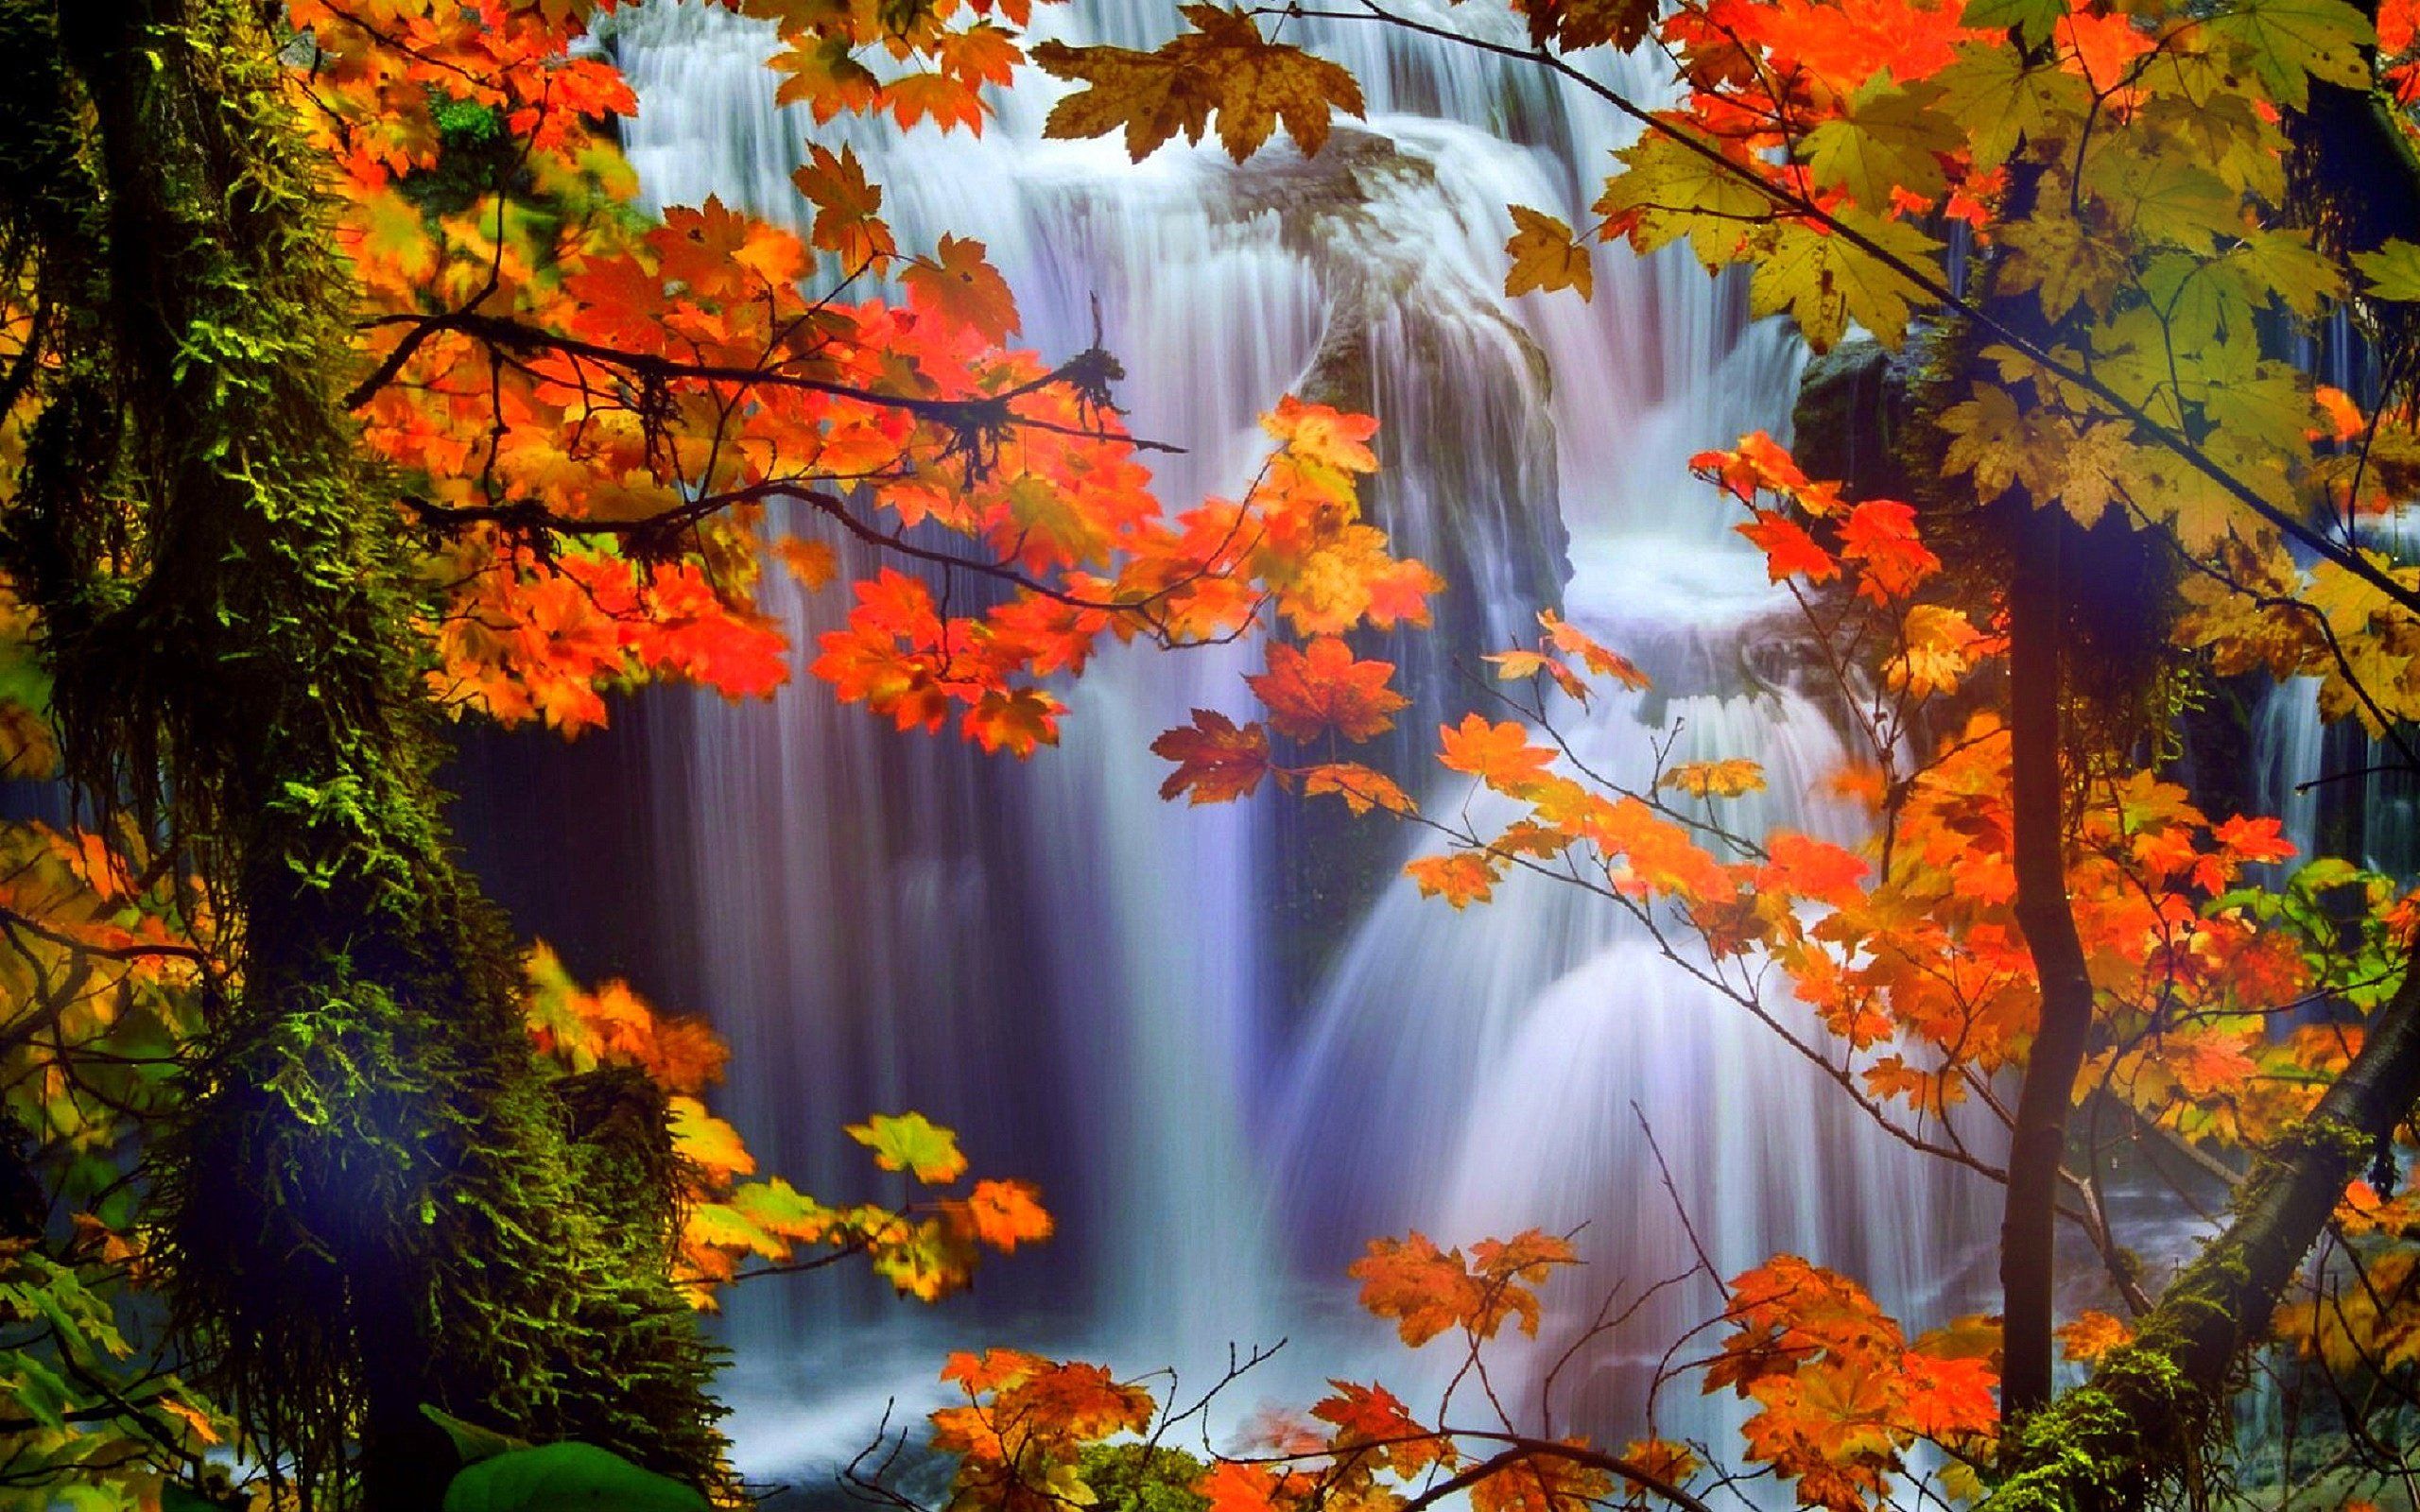 attractions, In, Dreams, Trees, Nature, Fall, Leaves, Beautiful, Waterfalls, Scenery, Love, Four, Seasons, Creative, Pre made, Colors, Stunning, Falls, Landscapes, Autumn Wallpaper HD / Desktop and Mobile Background